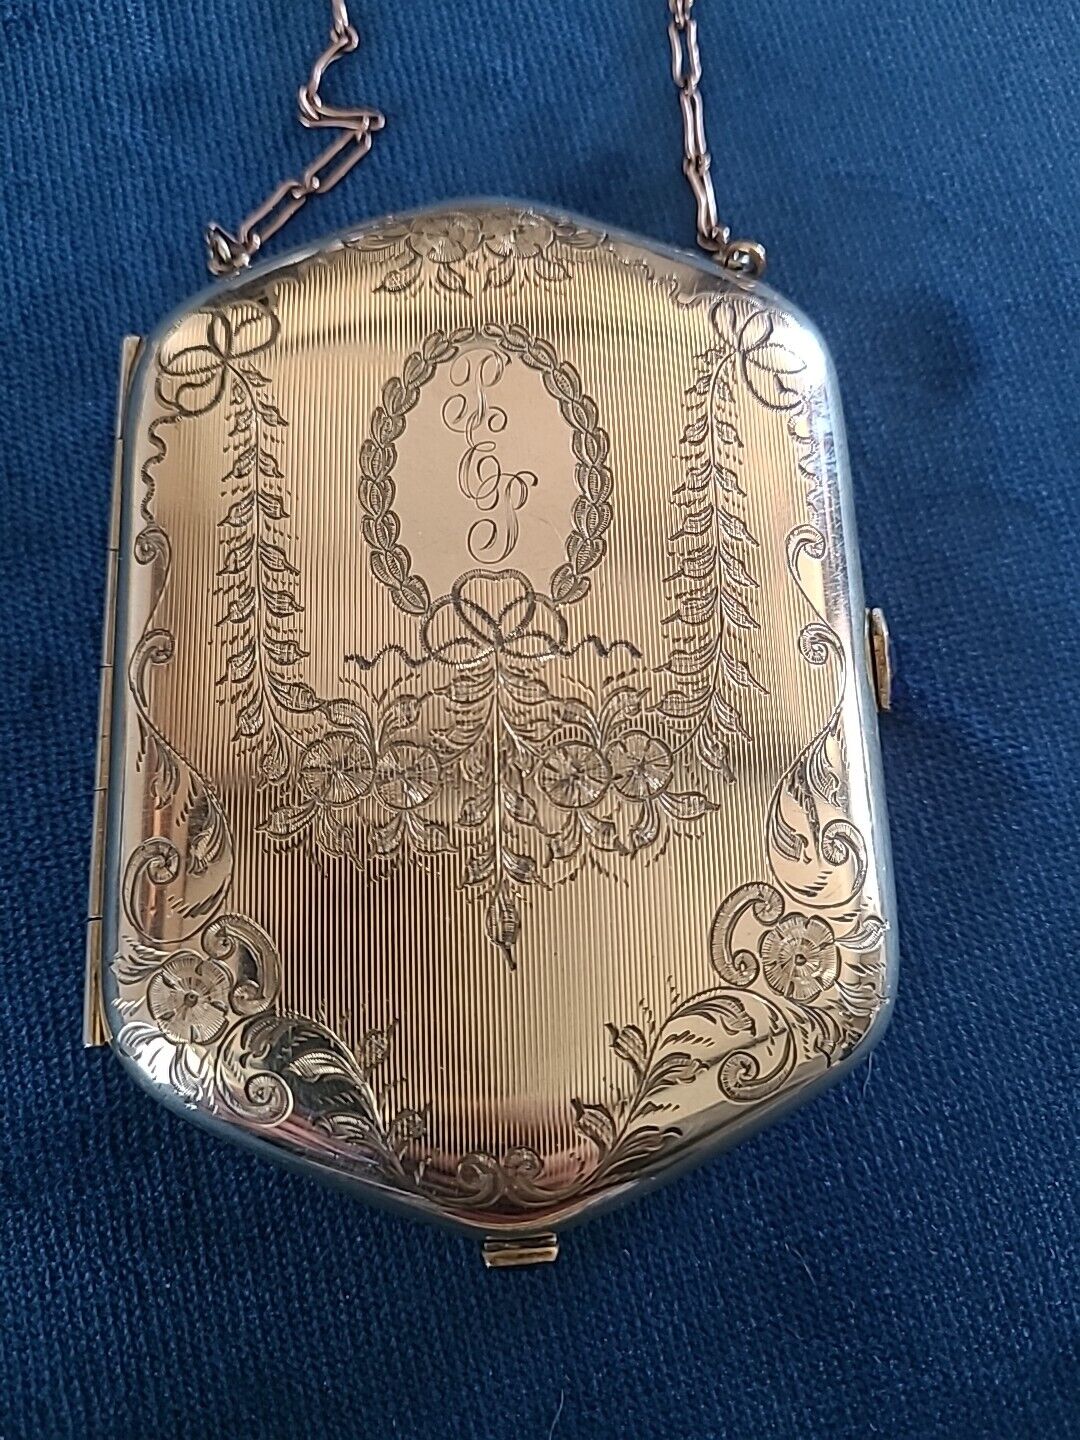 Engraved Vintage Rolled Gold Shell Coin Purse Cigarette Compact